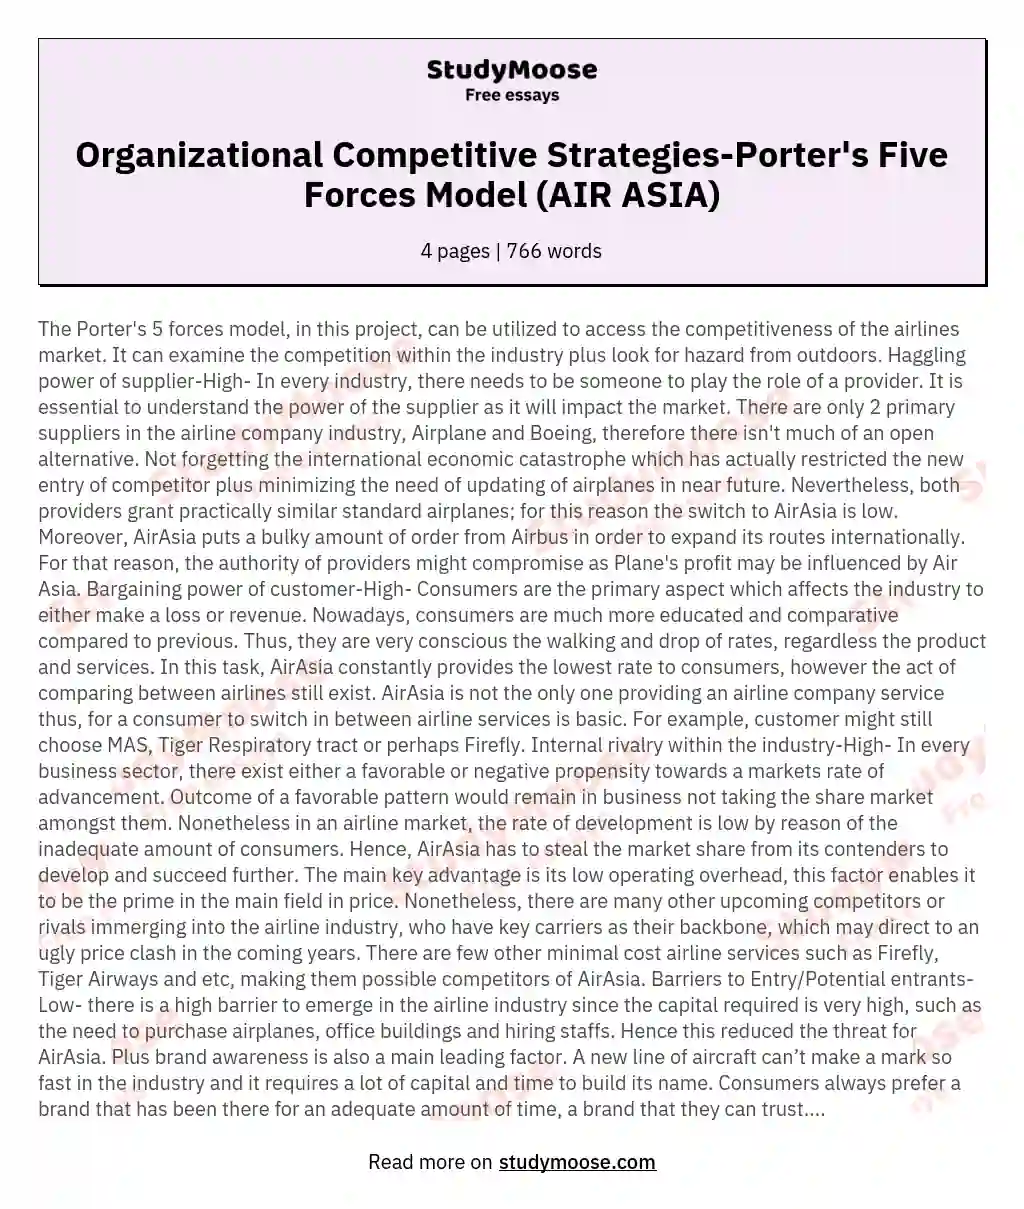 Organizational Competitive Strategies-Porter's Five Forces Model (AIR ASIA)